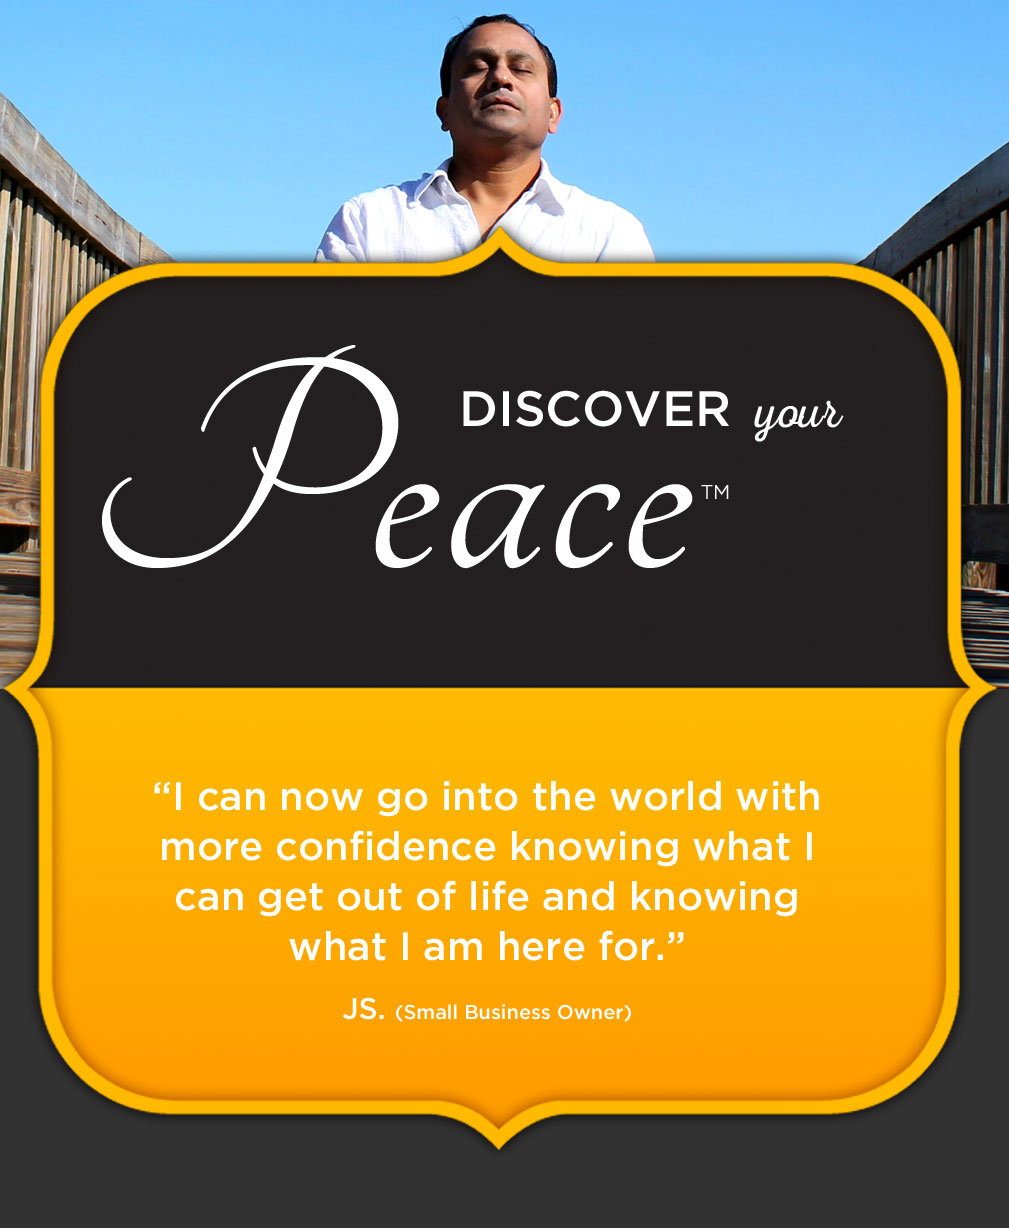 Amazing Raj - Discover your Peace